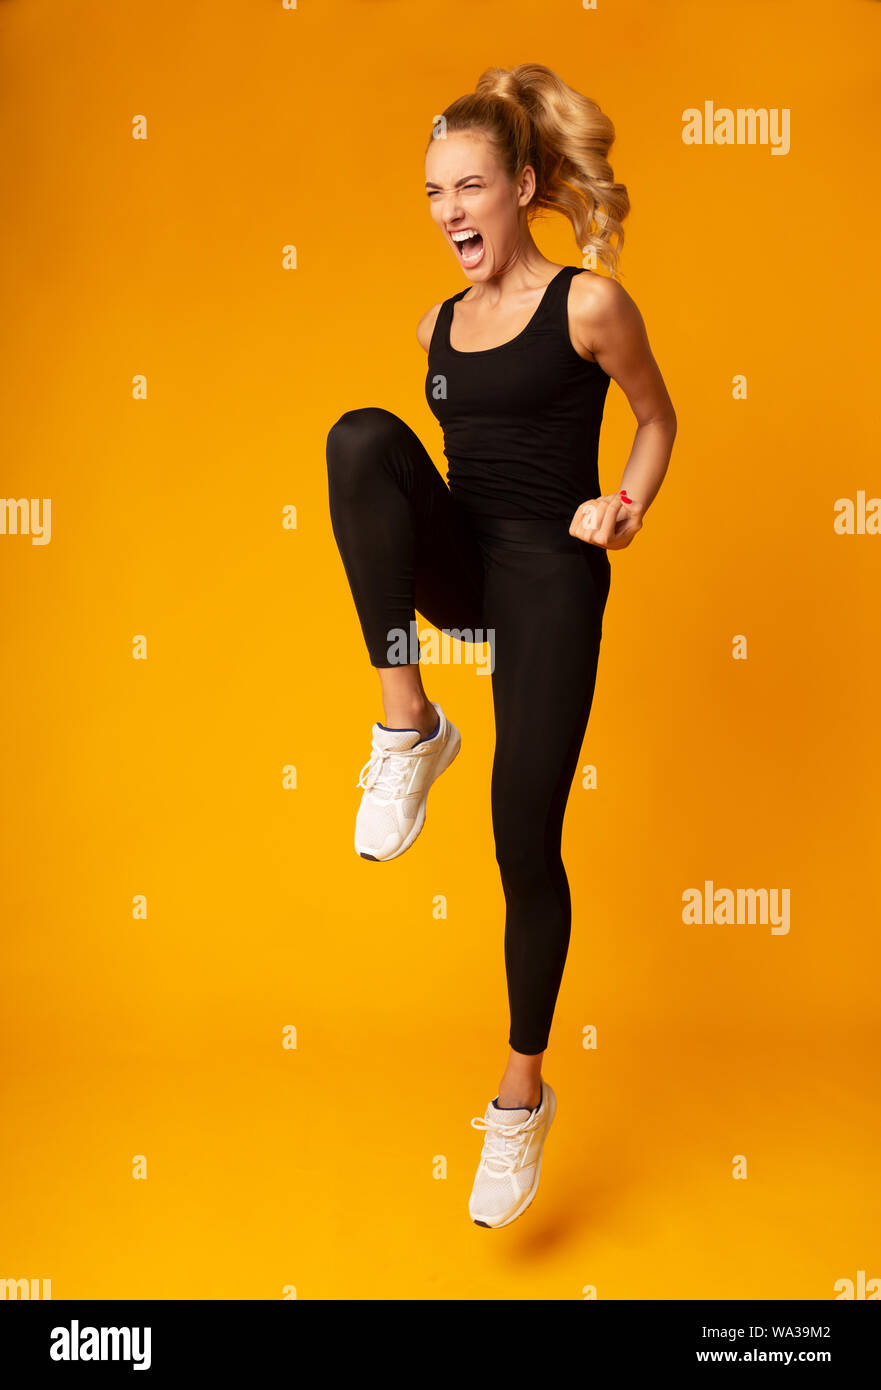 Skinny Girl Jumping Expressing Aggression Over Yellow Studio Background Stock Photo